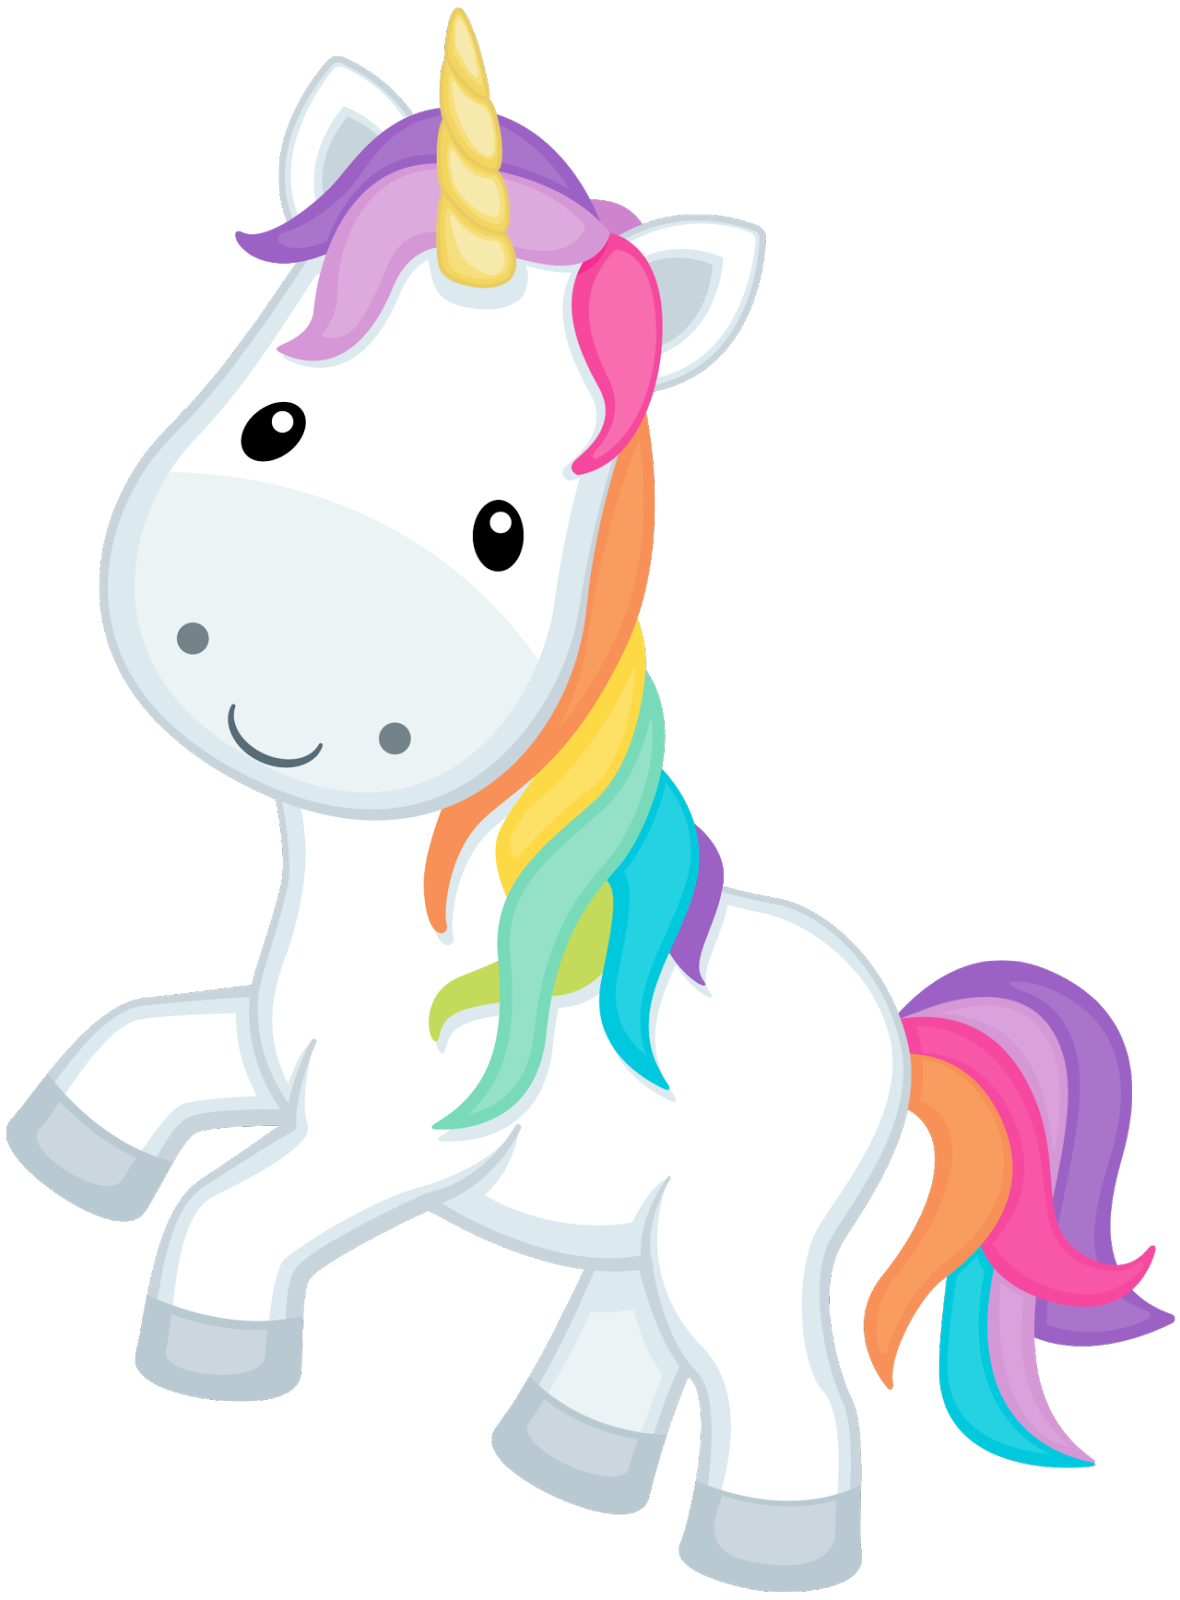 Download Clipart baby unicorn, Clipart baby unicorn Transparent ...